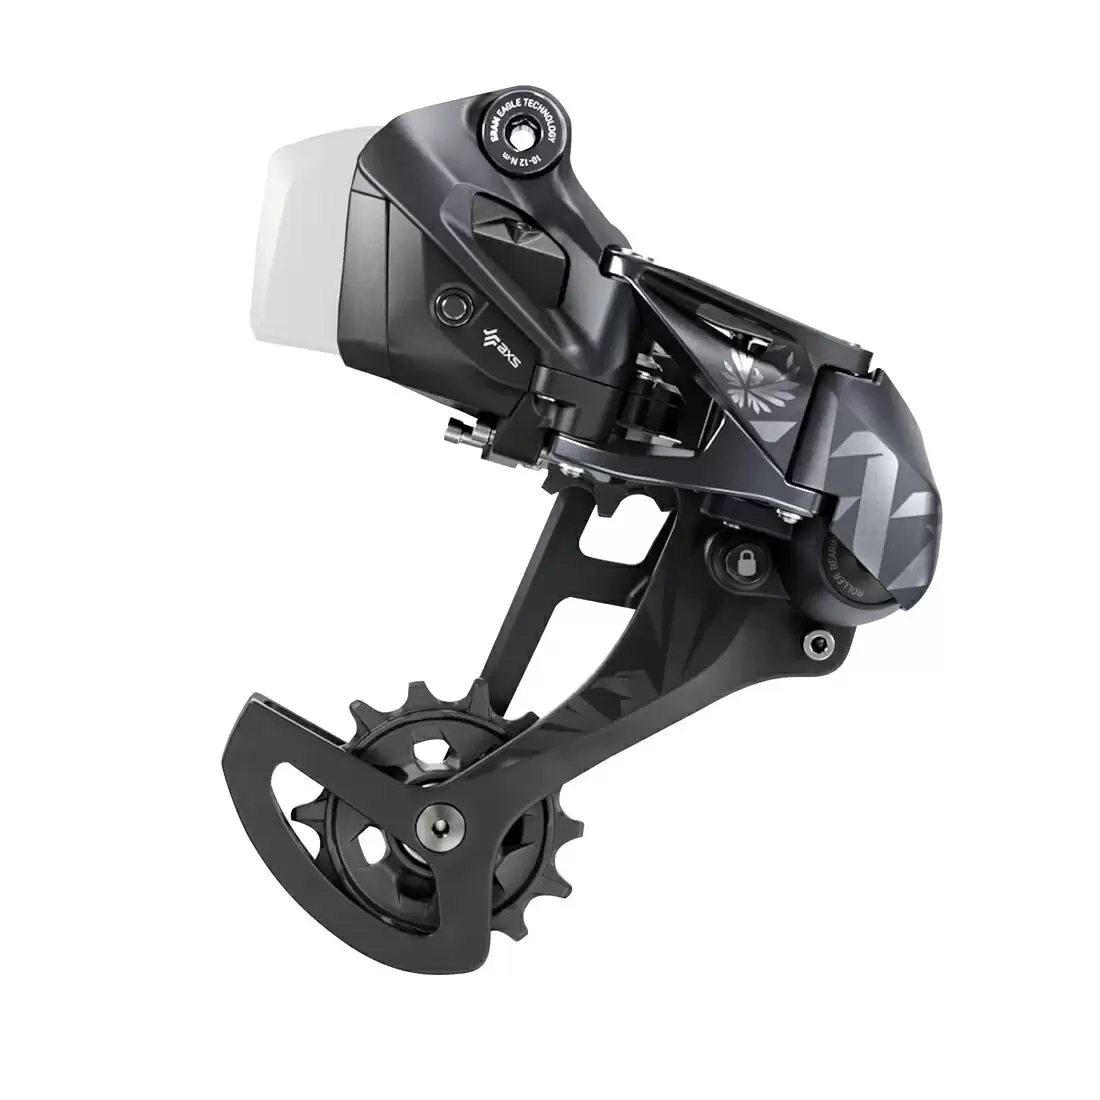 Rear derailleur X01 Eagle AXS 12v without battery - image